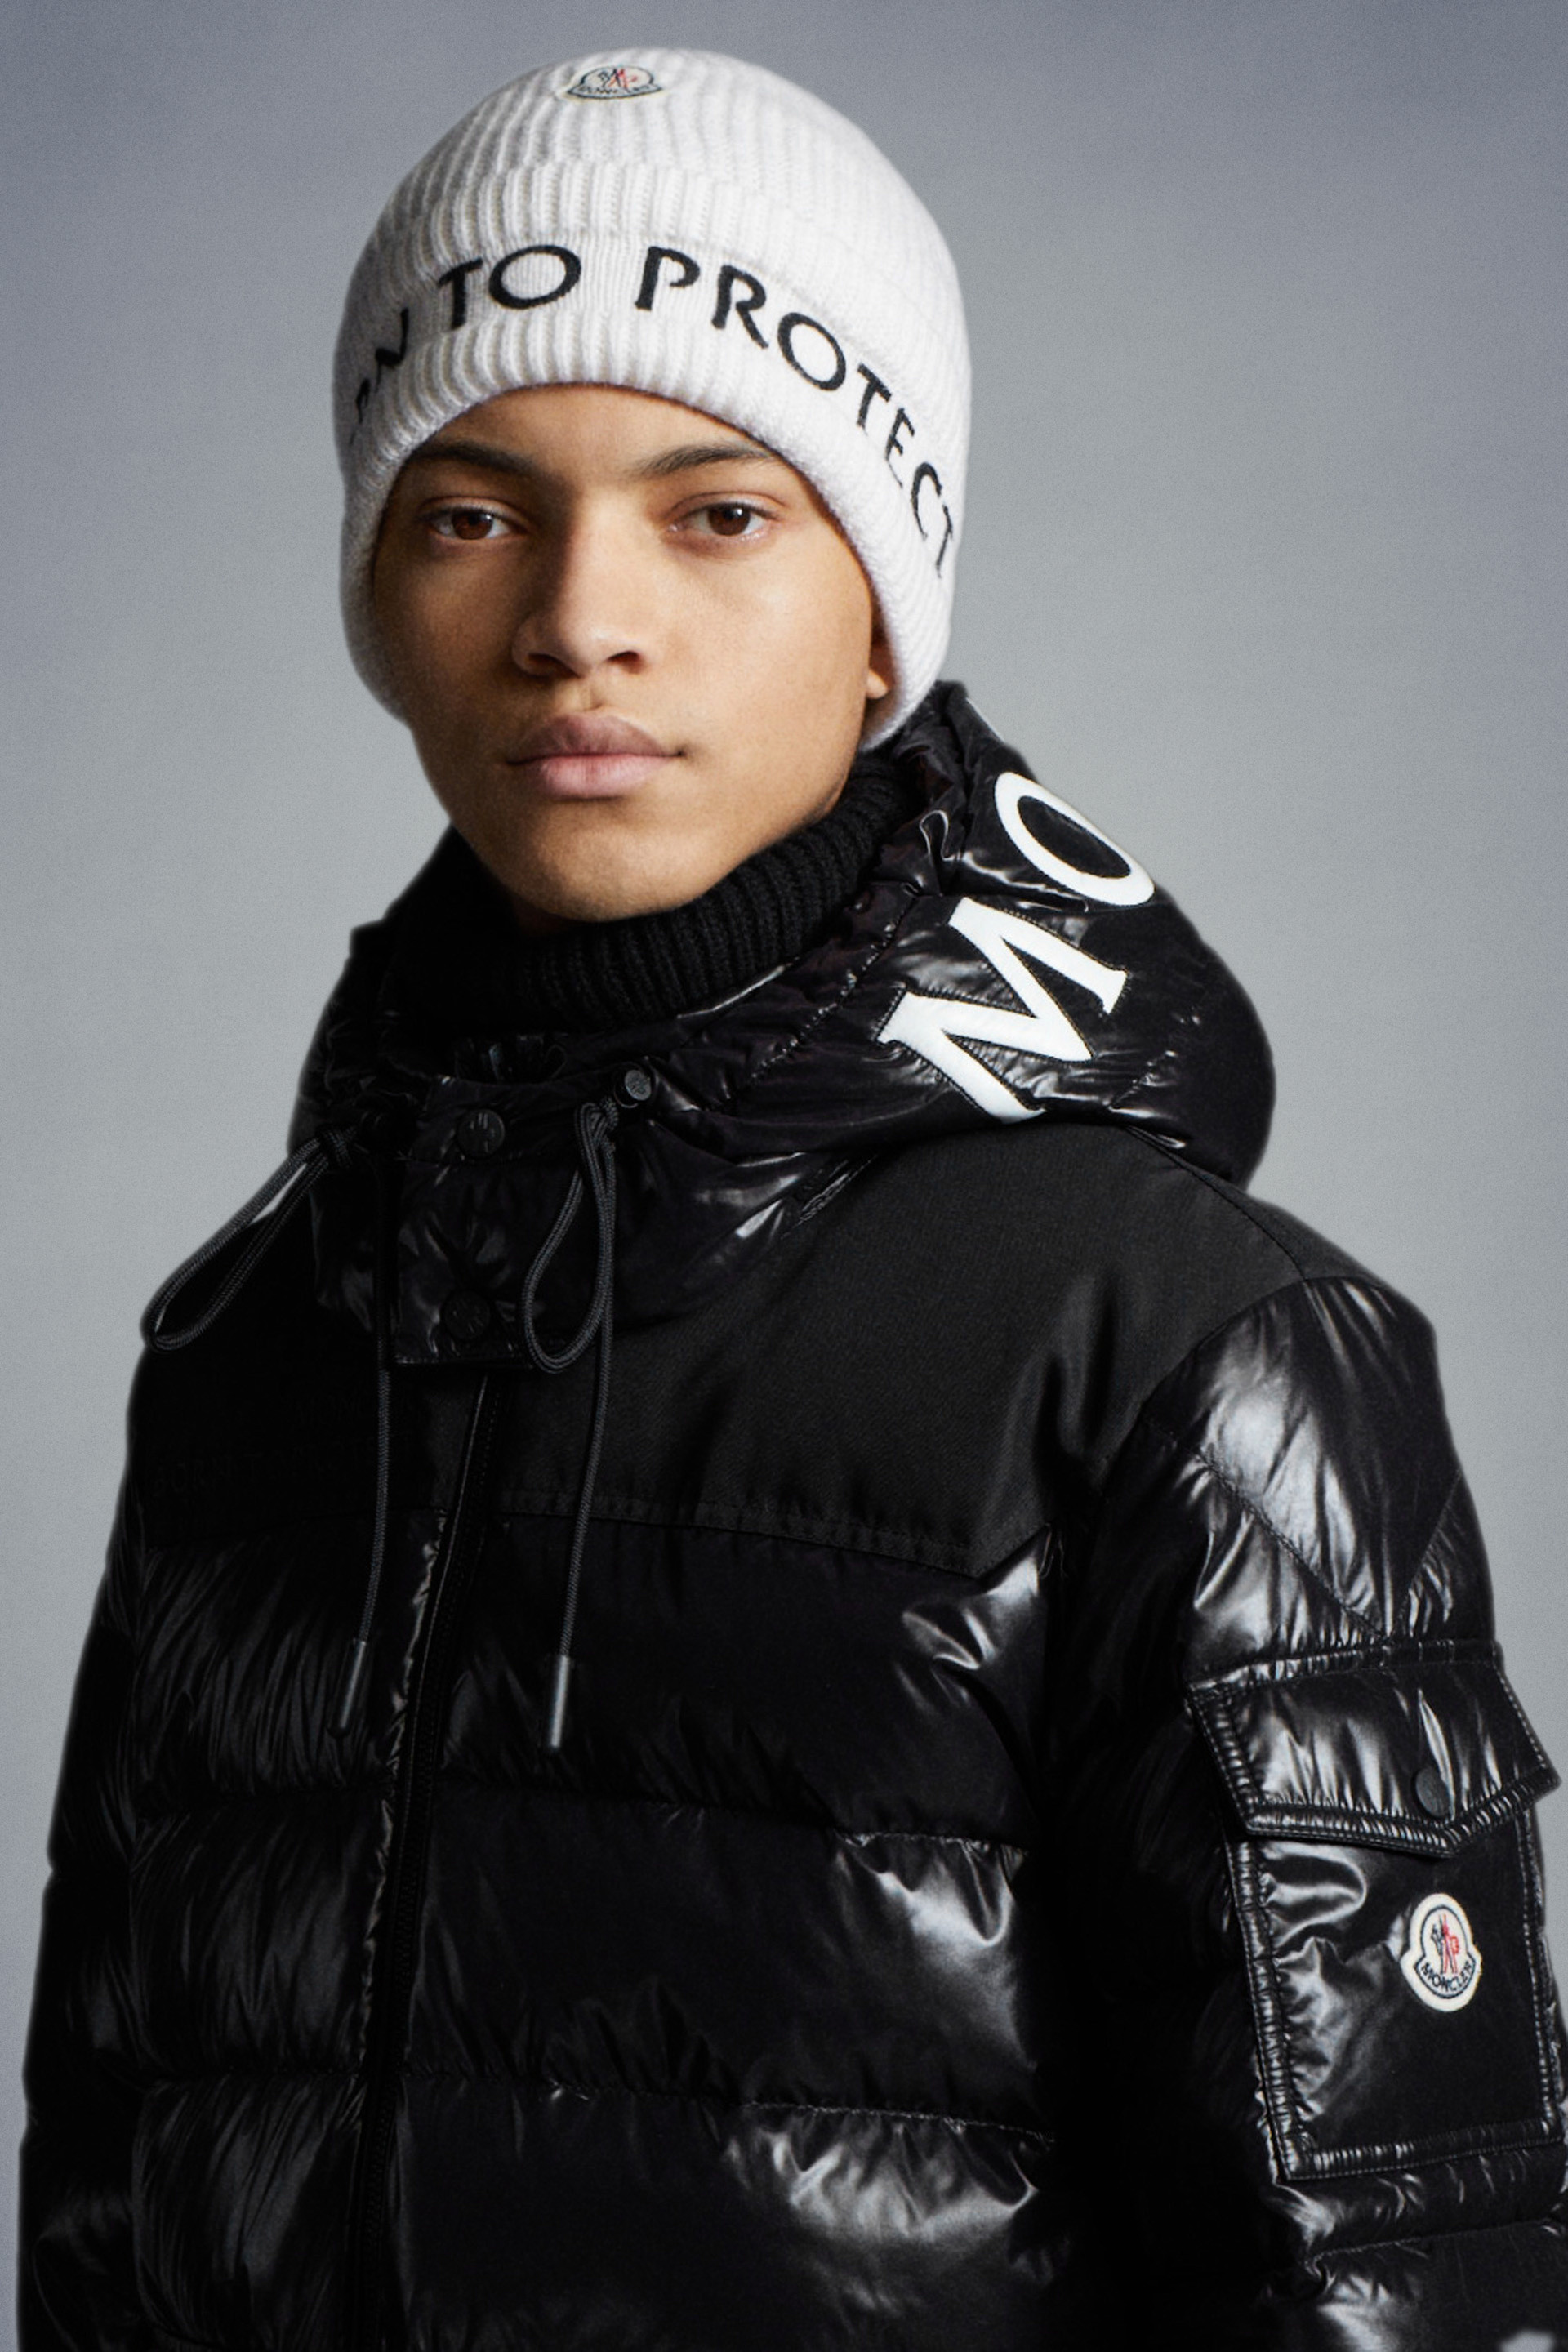 Moncler - Born To Protect | Moncler US